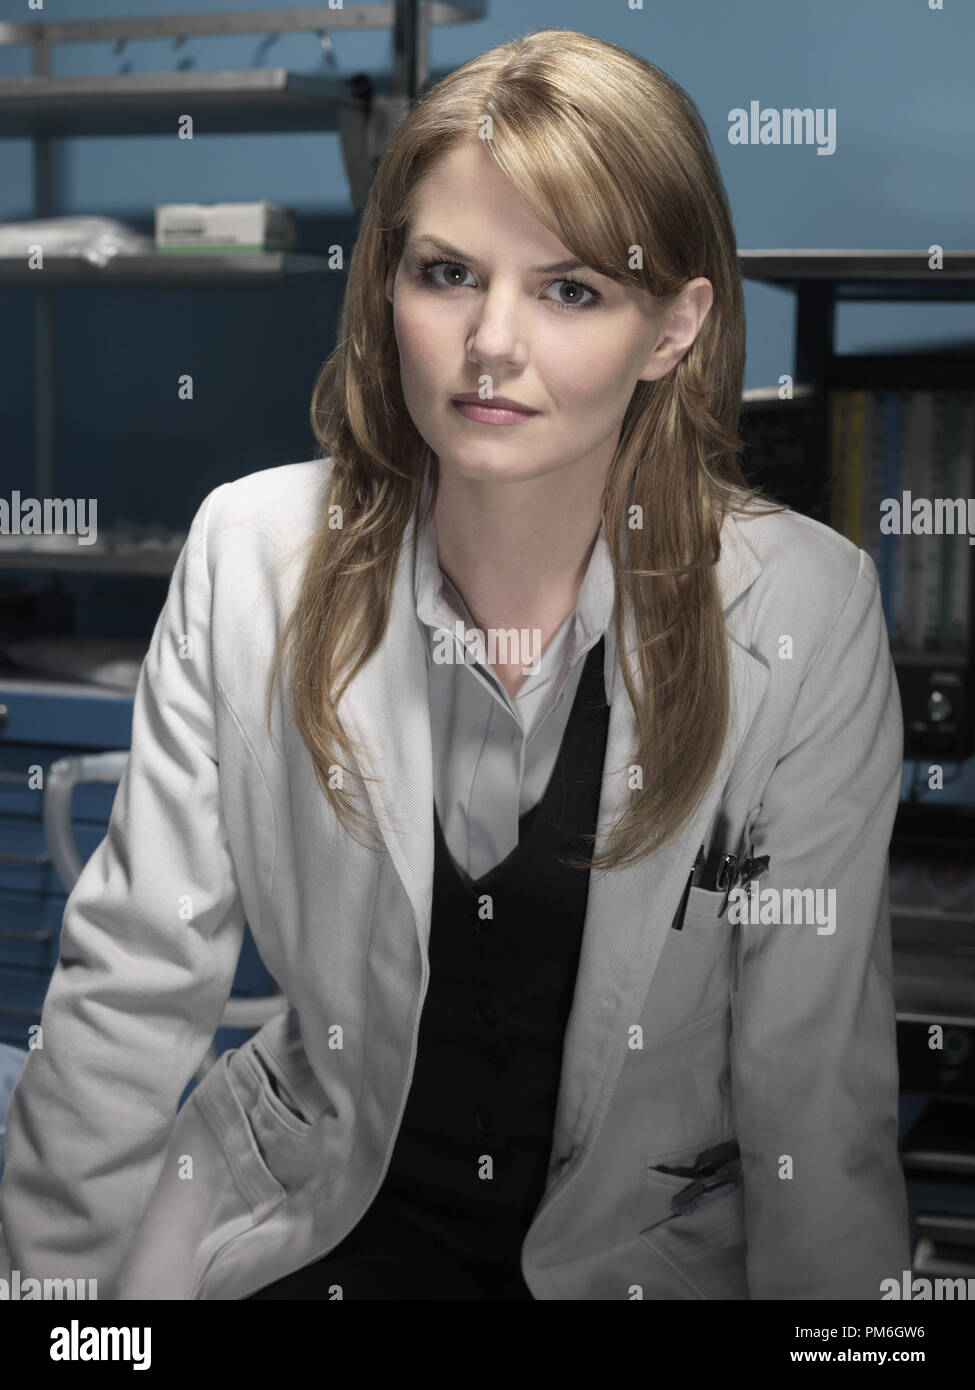 Film Still from 'House MD' Jennifer Morrison 2008 Photo credit: Art Streiber       File Reference # 30755795THA  For Editorial Use Only -  All Rights Reserved Stock Photo